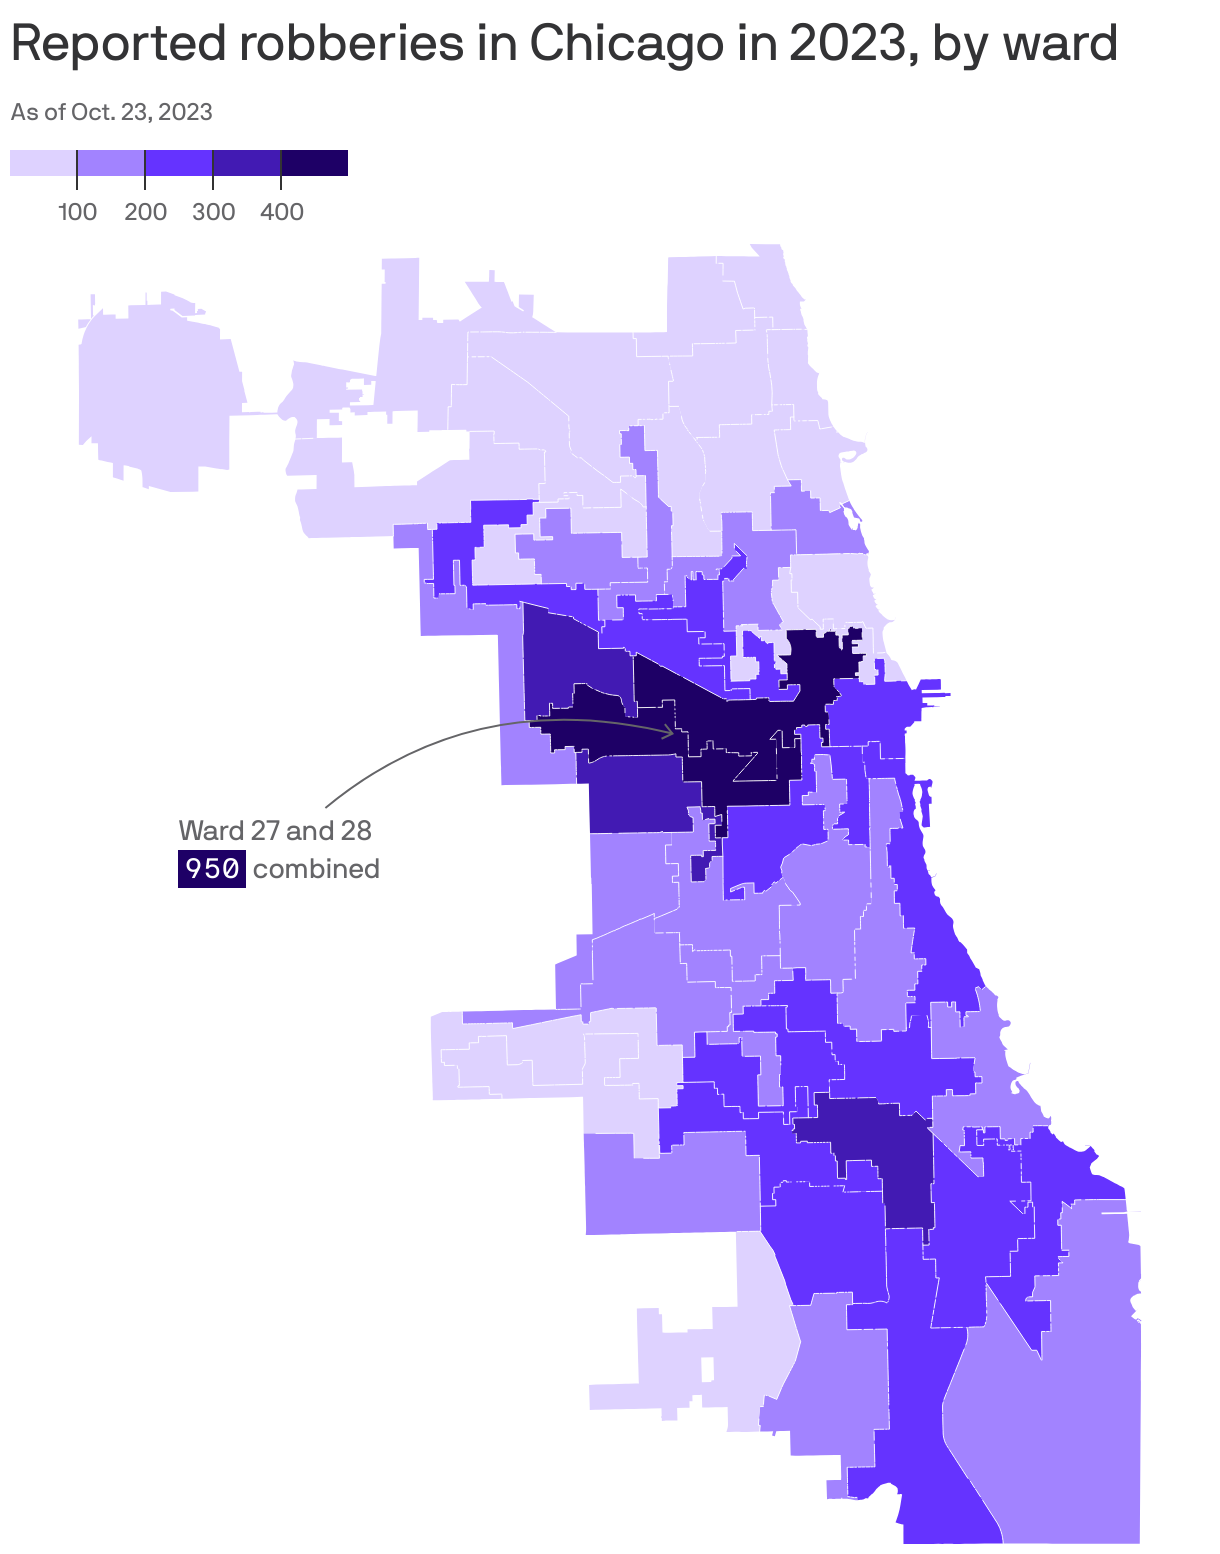 Reported robberies in Chicago in 2023, by ward